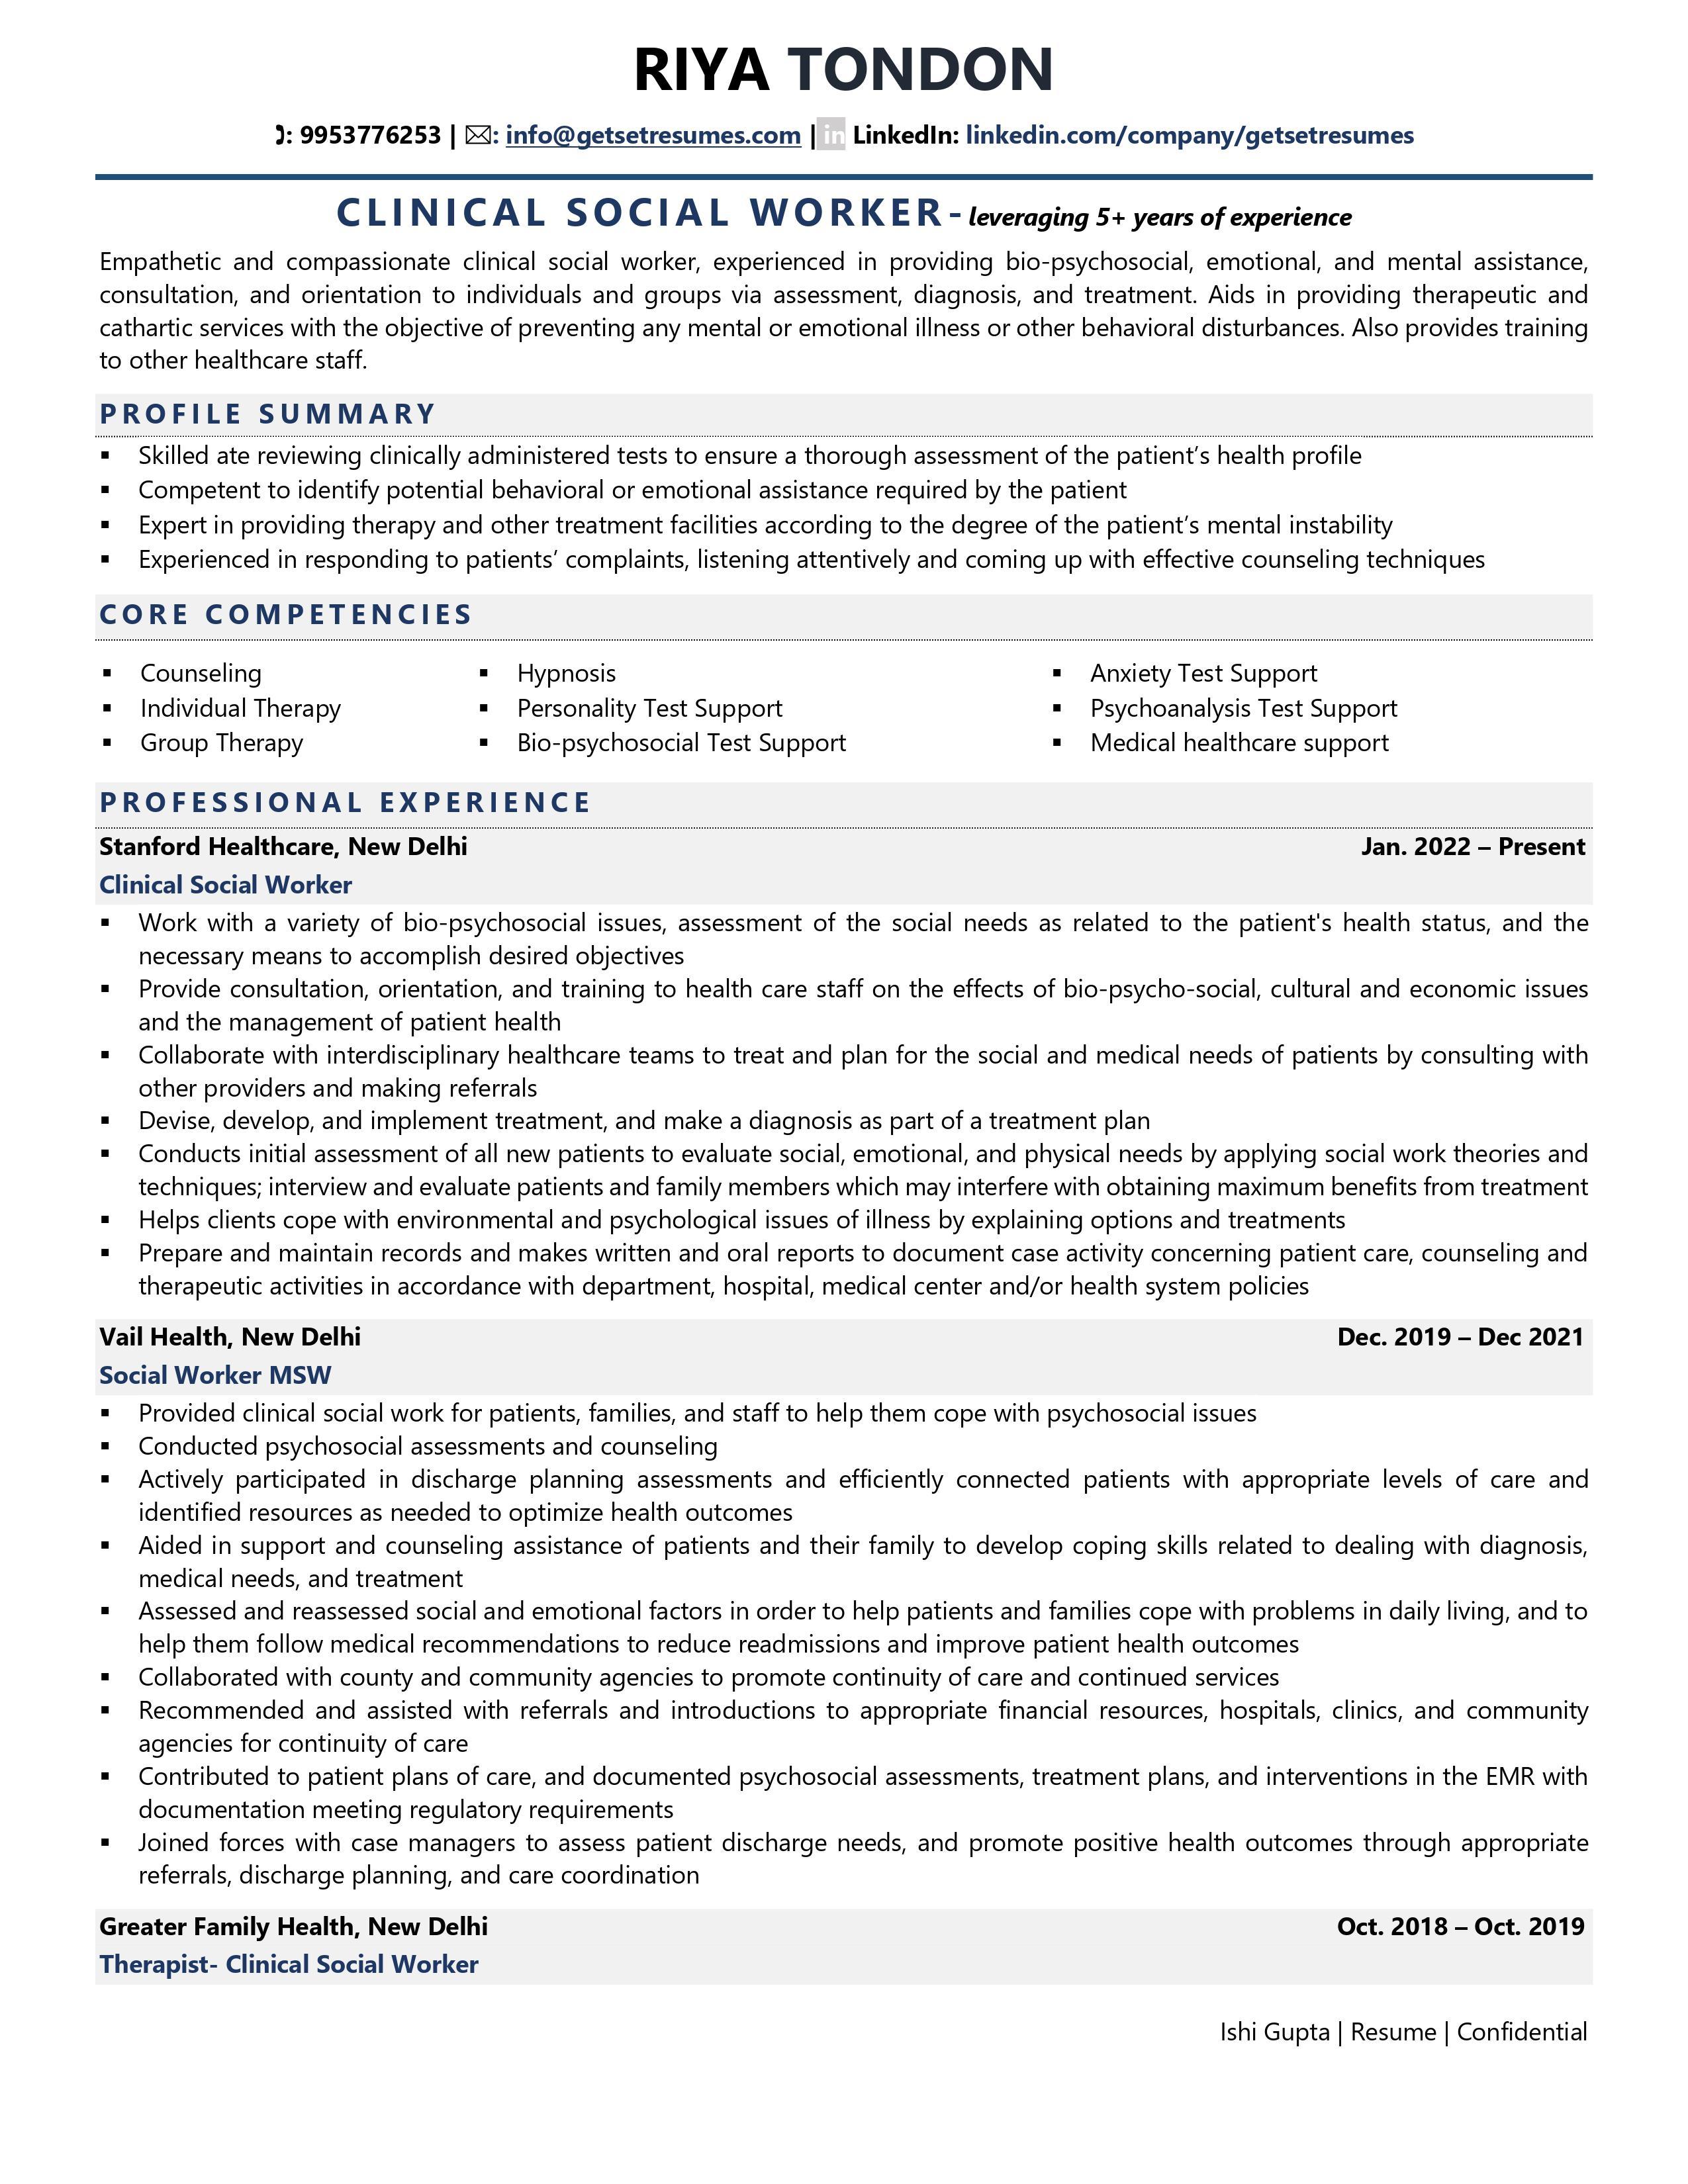 Clinical Social Worker - Resume Example & Template